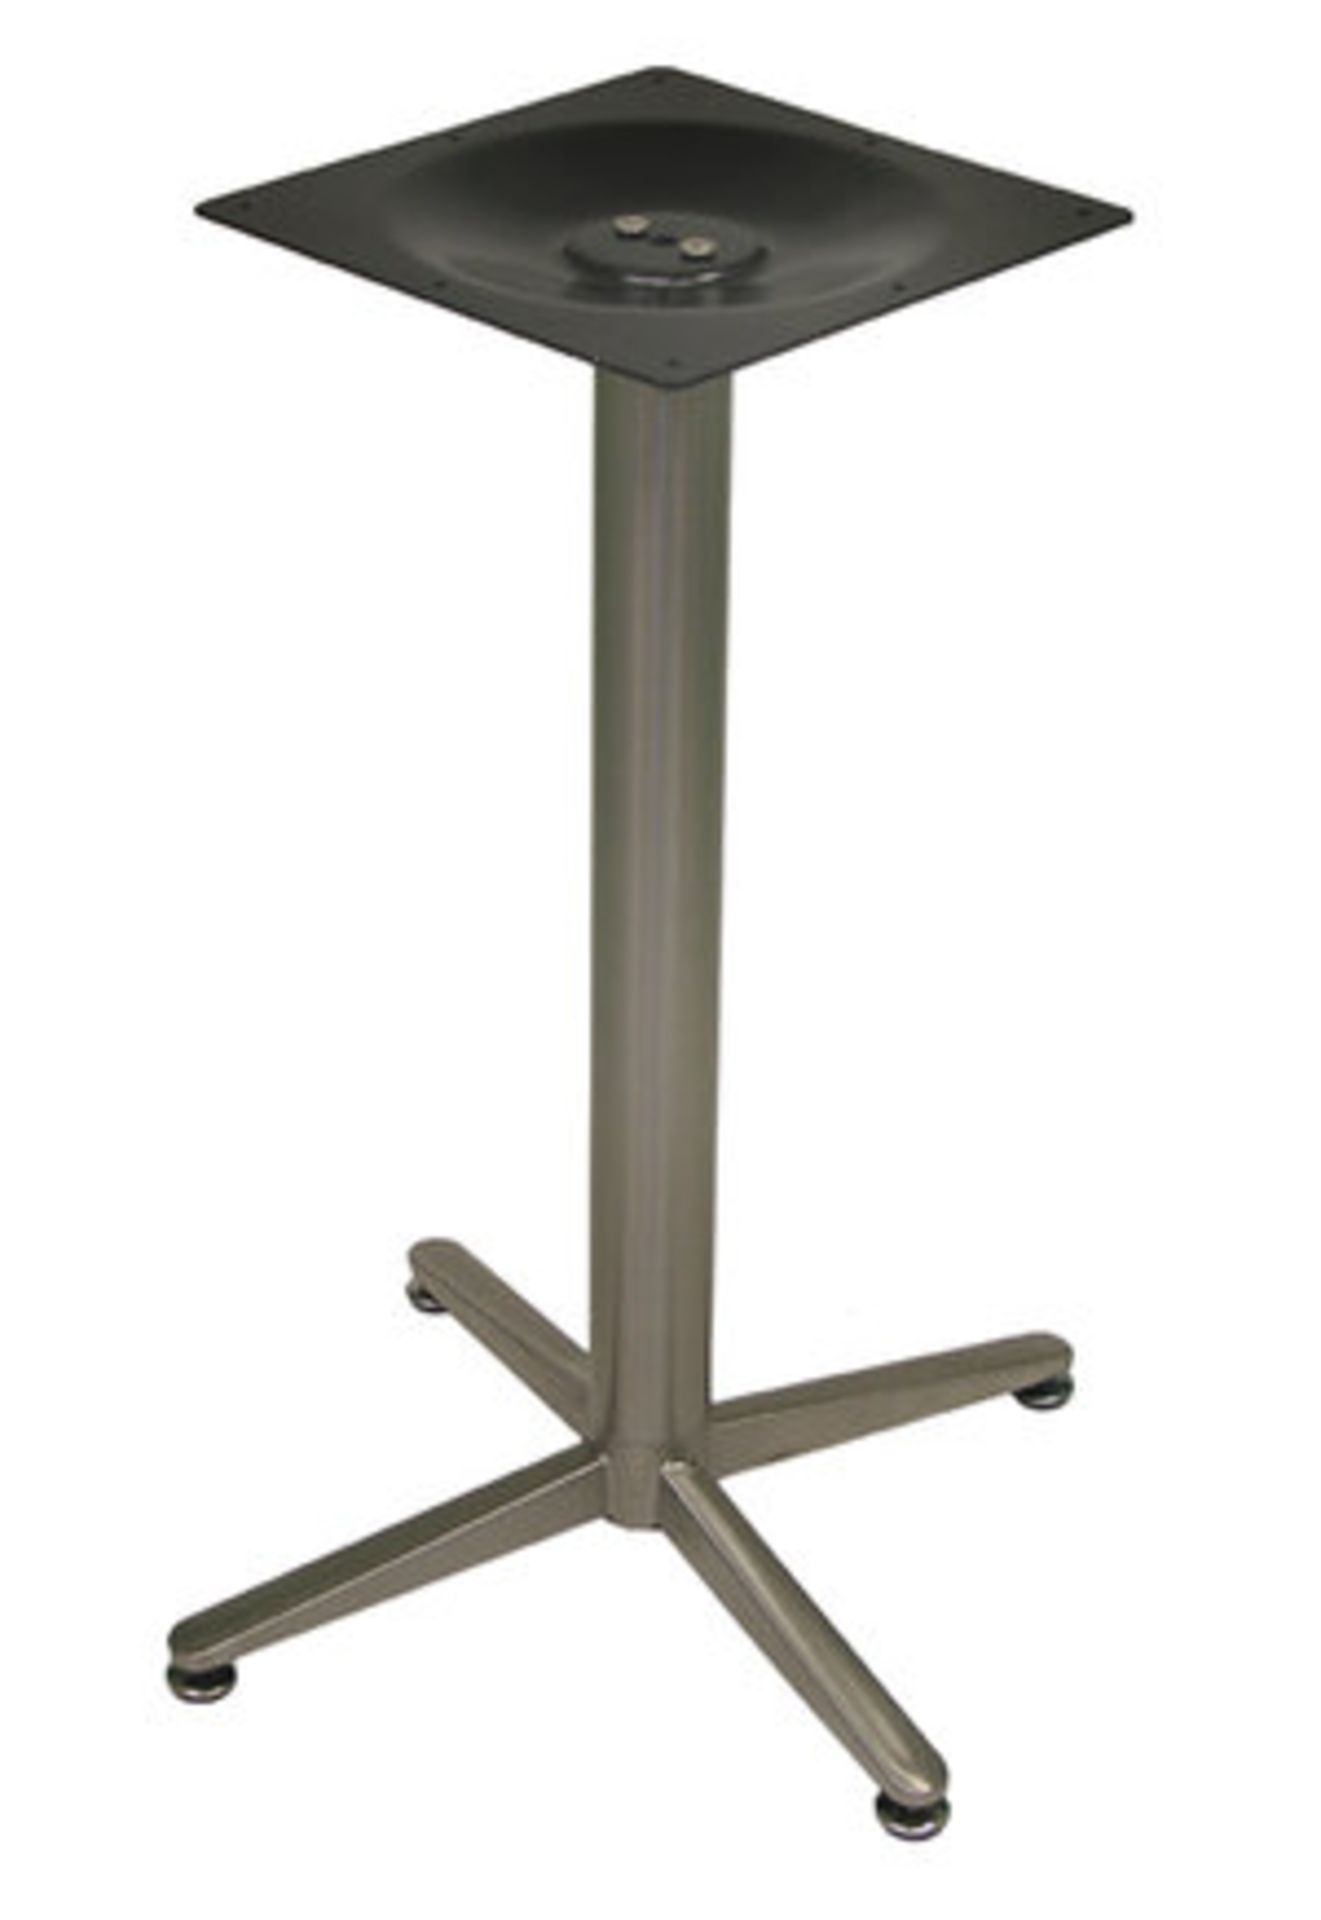 Amanda 4 Small Base and Columns - E-55-55. Type 201 Stainless Steel, base and column. Dimensions: